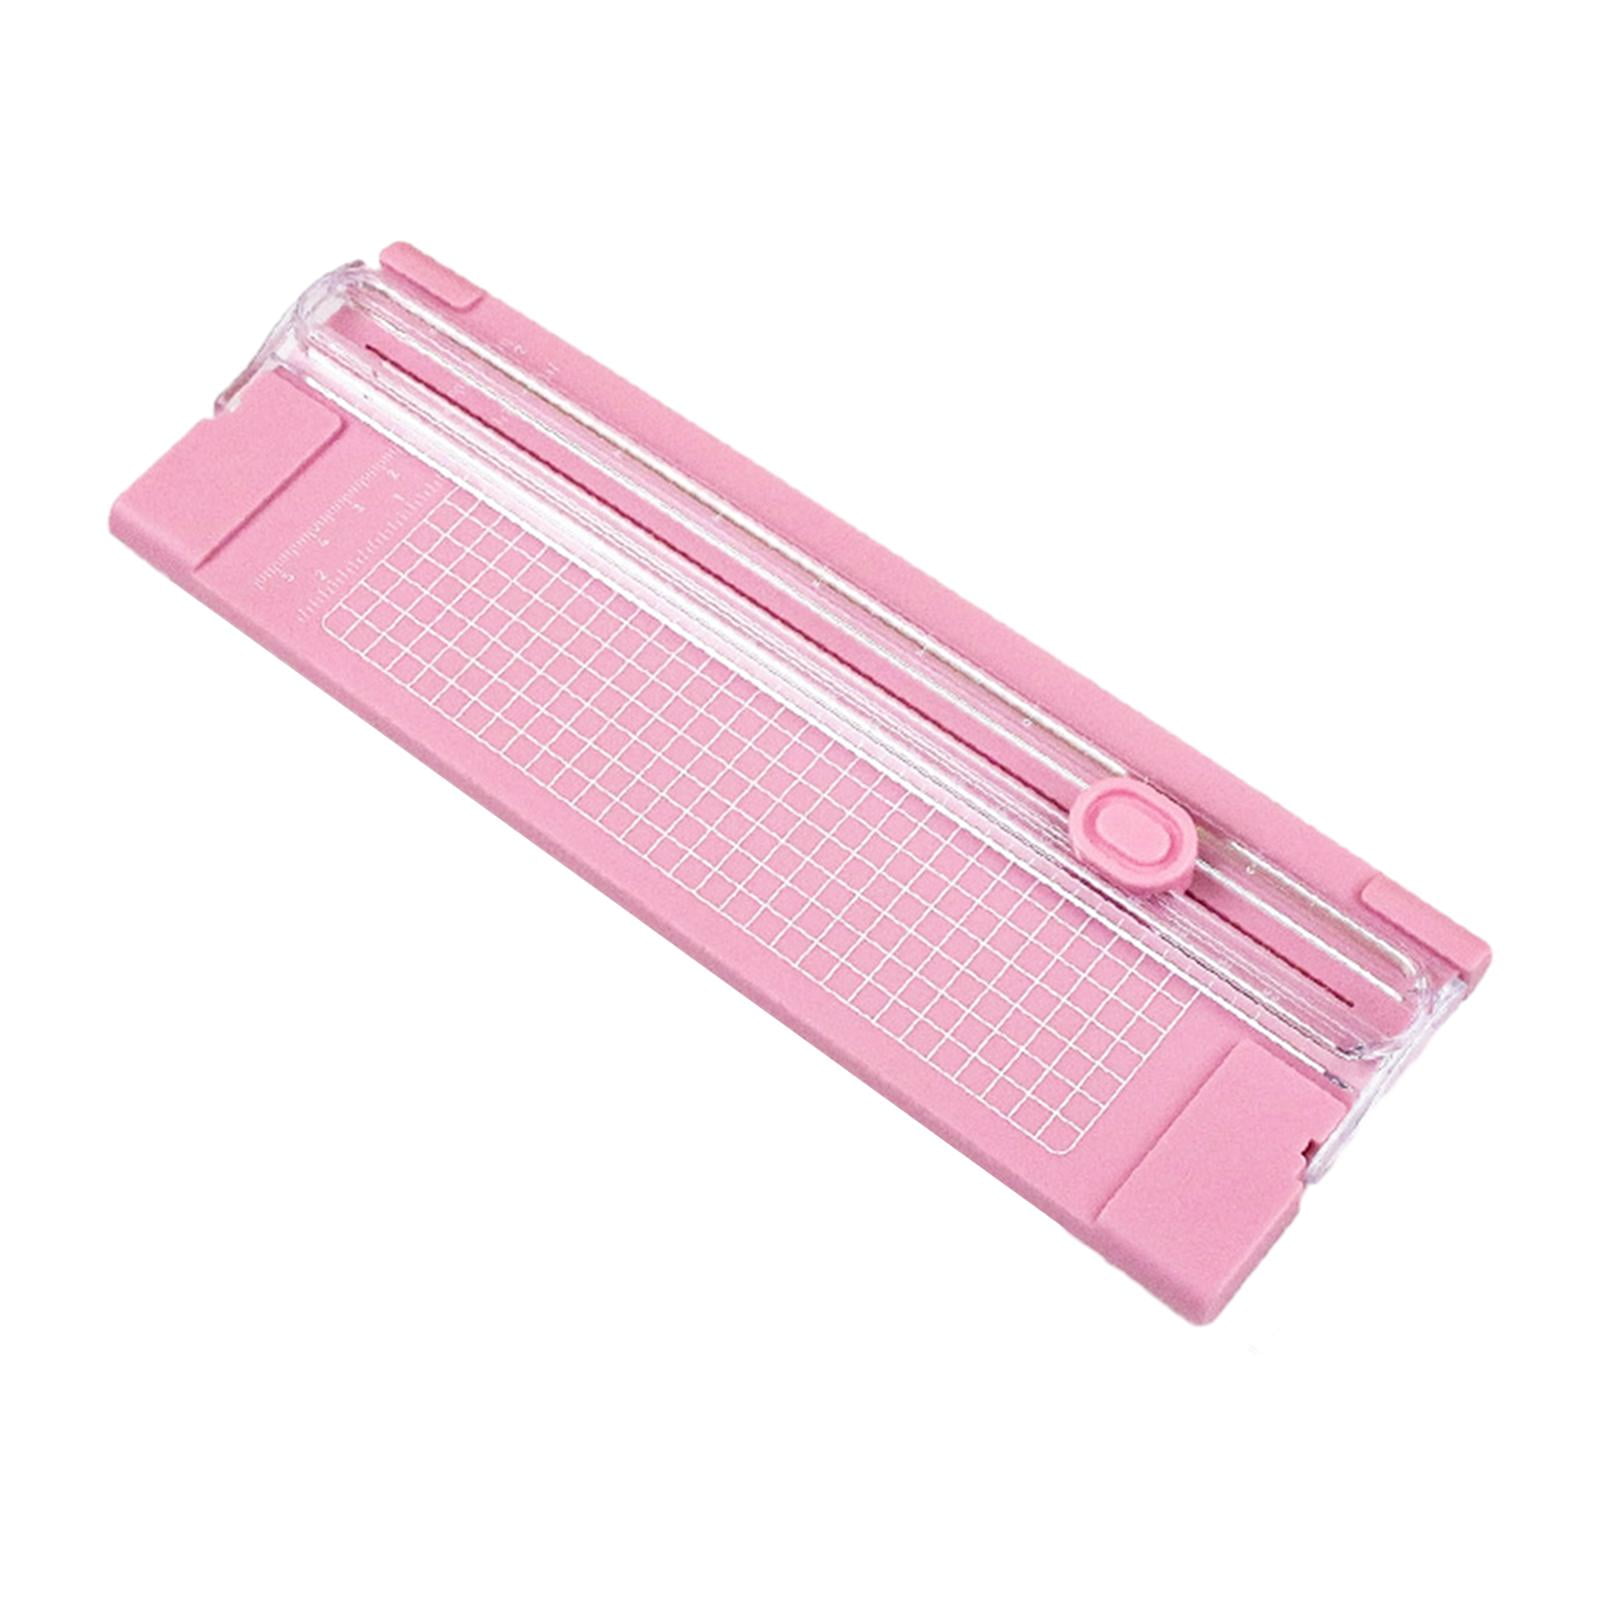 A4 Paper Cutter Mini Crafts DIY Non Slip Ruler Hand Tool Durable Photo Trimmer Lightweight for Office Home School Stationery Paper Photo Pink, Size